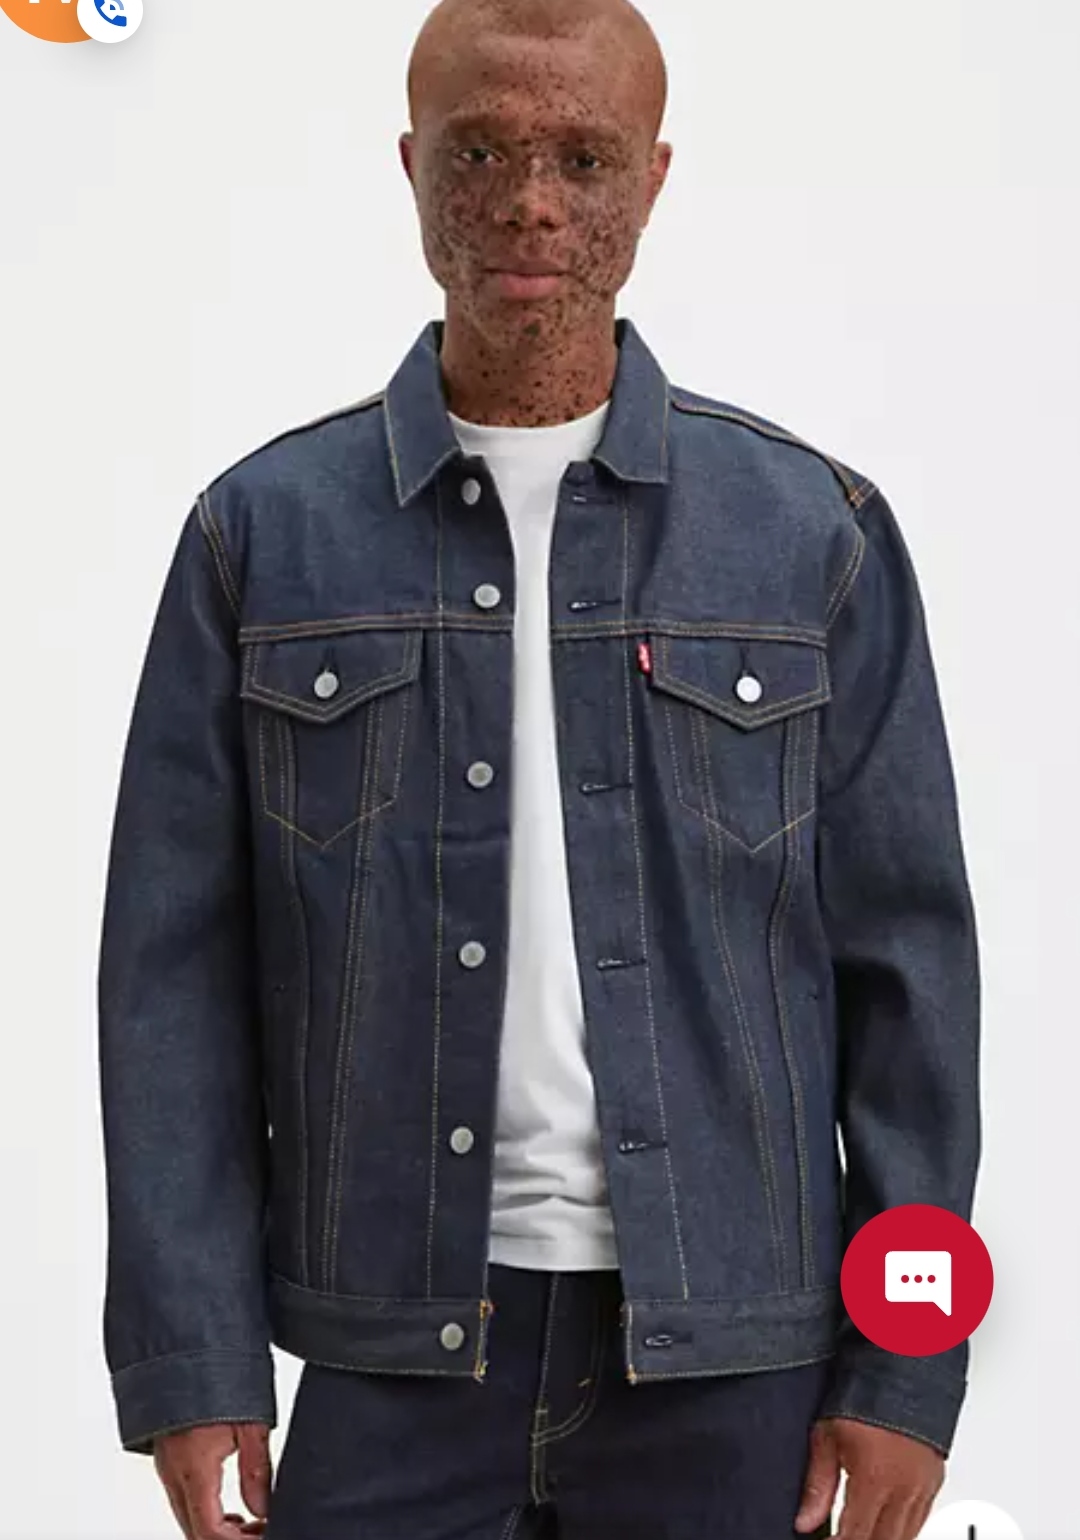 Levi's jeans jacket – ONE Shopping Mall